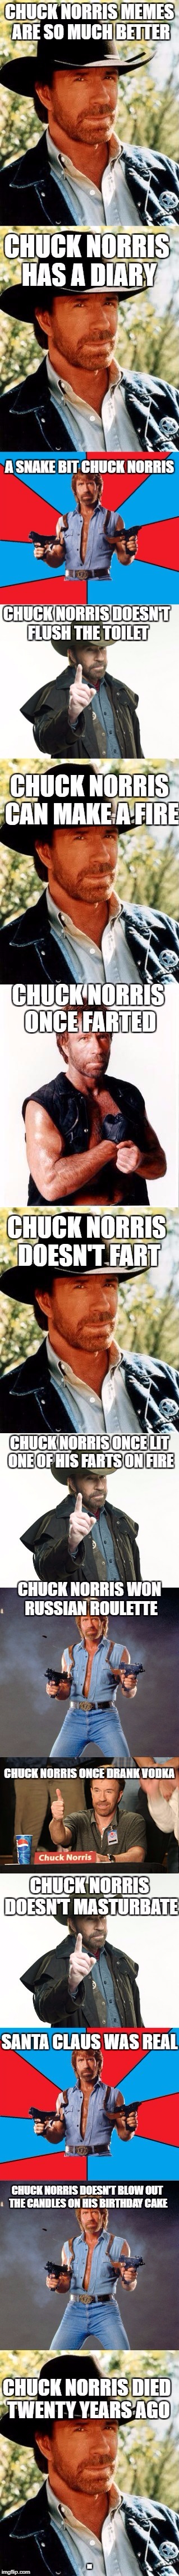 ...if you get rid of the bottom text | . | image tagged in memes,chuck norris,dank memes,funny,bad puns | made w/ Imgflip meme maker